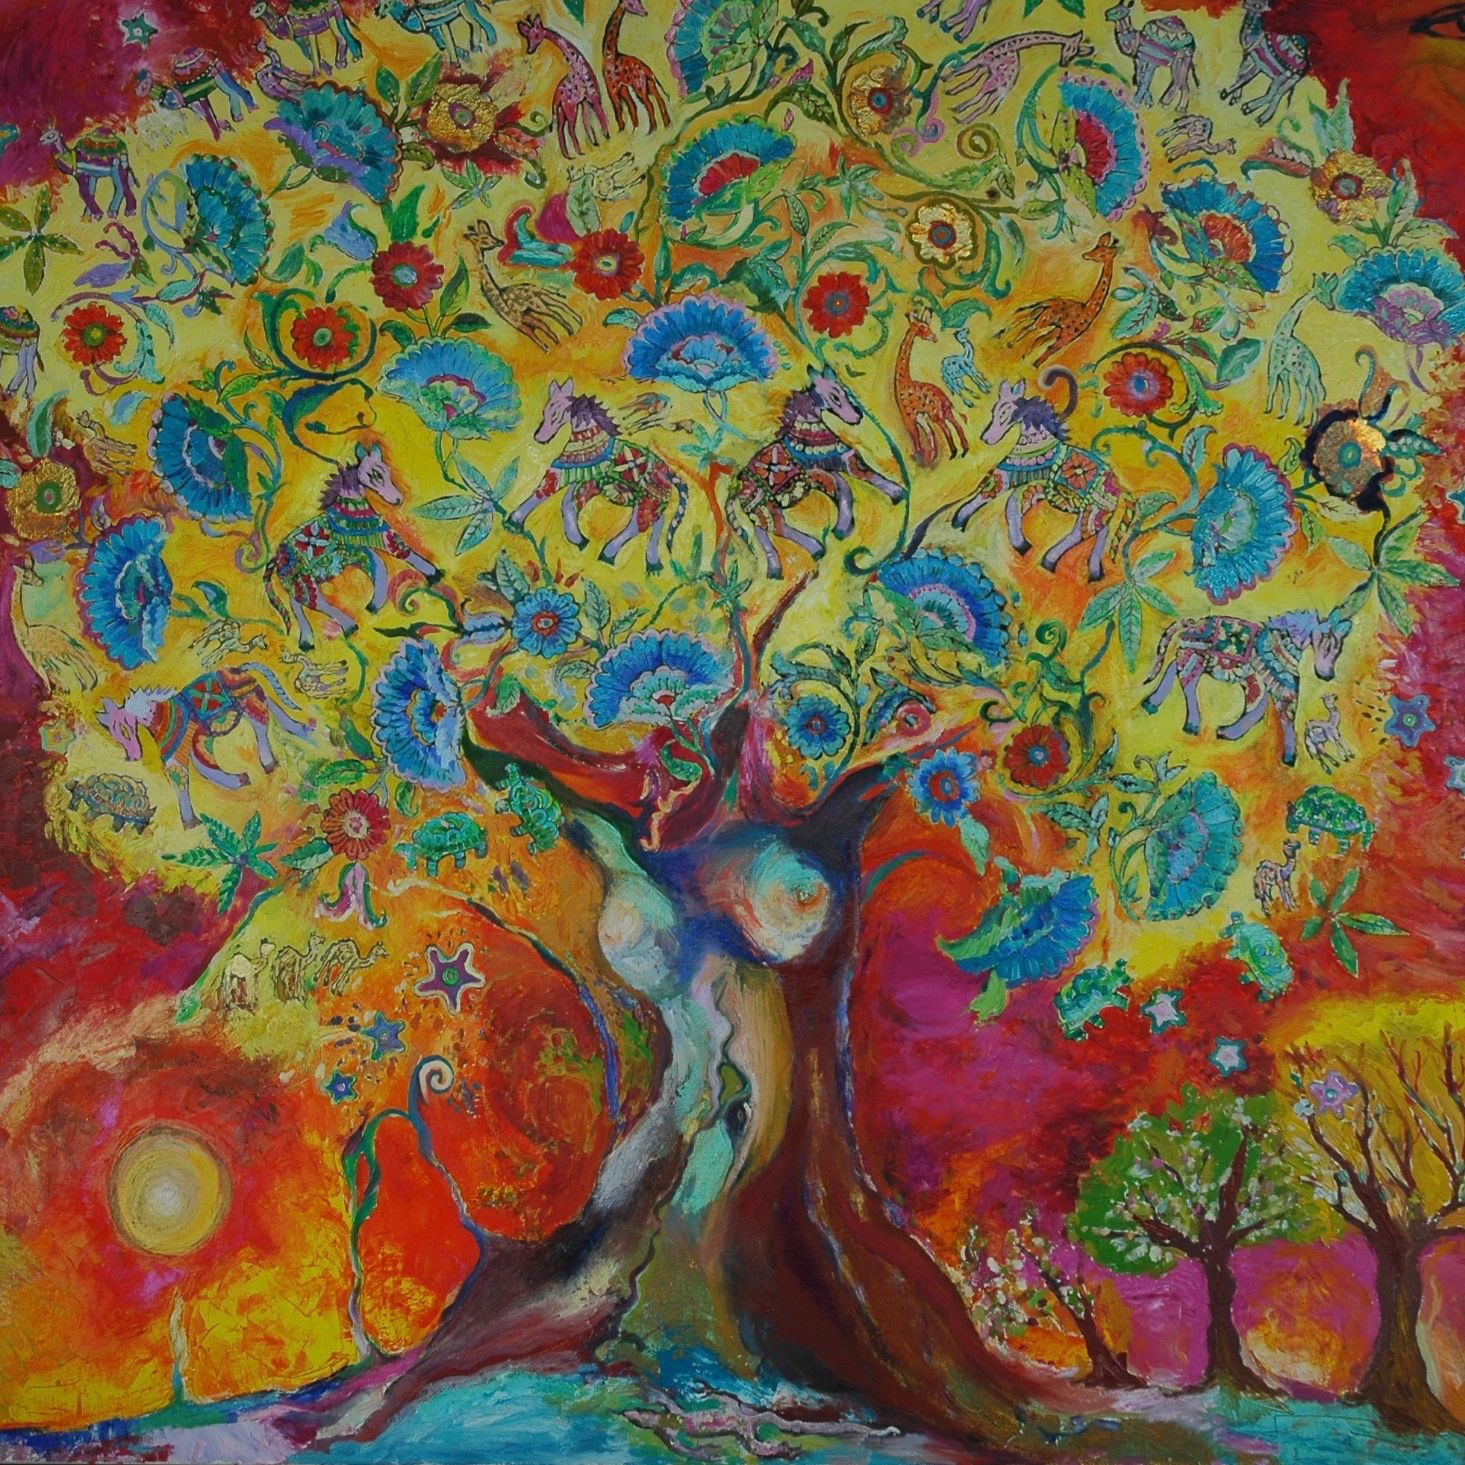 Autumn scene with a Tree of Life bathed in a vibrant sunset